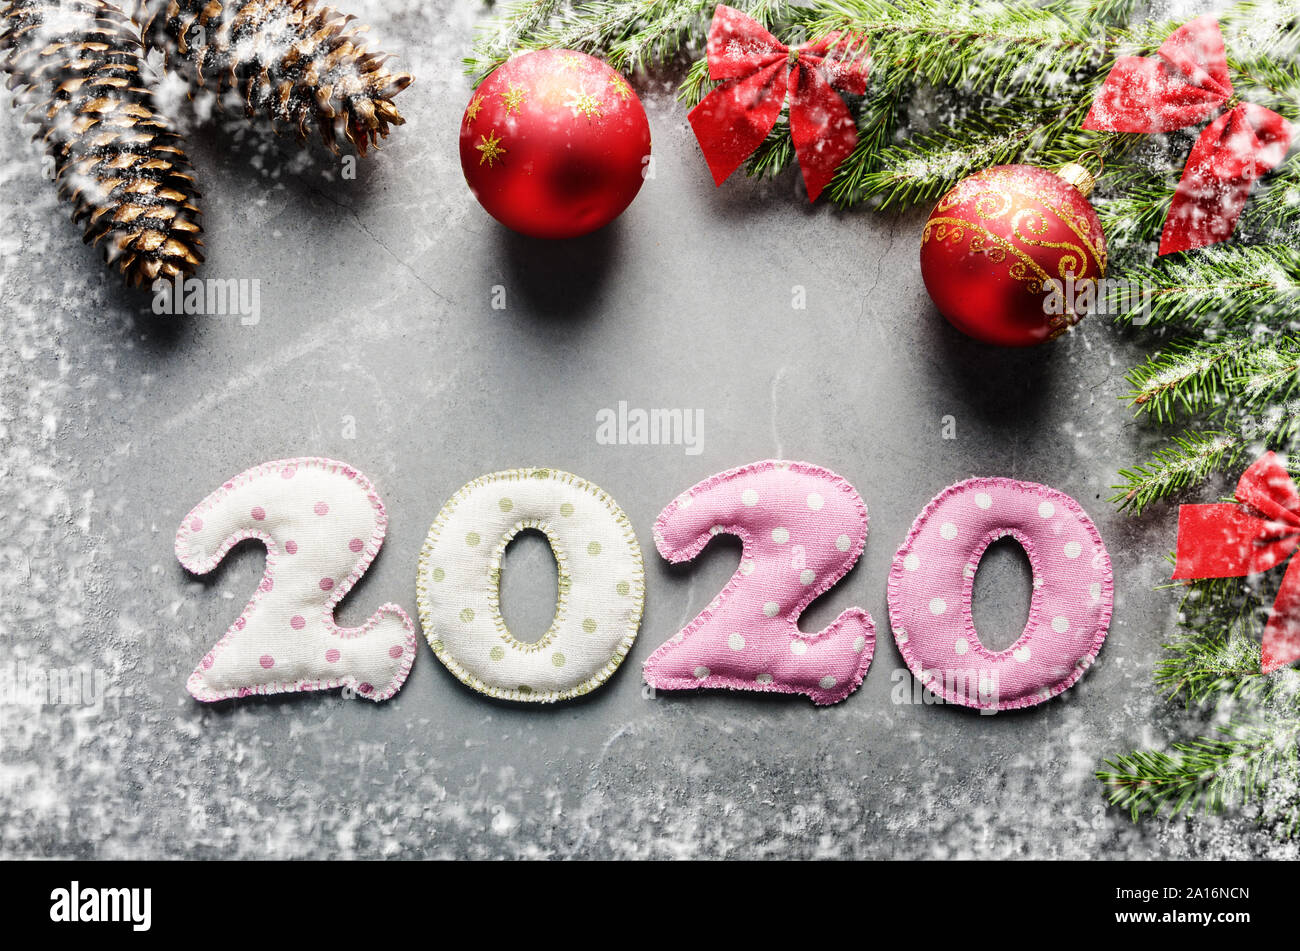 Colorful stitched digits 2020 of polkadot fabric with Christmas decorations flat lay on stone background Stock Photo